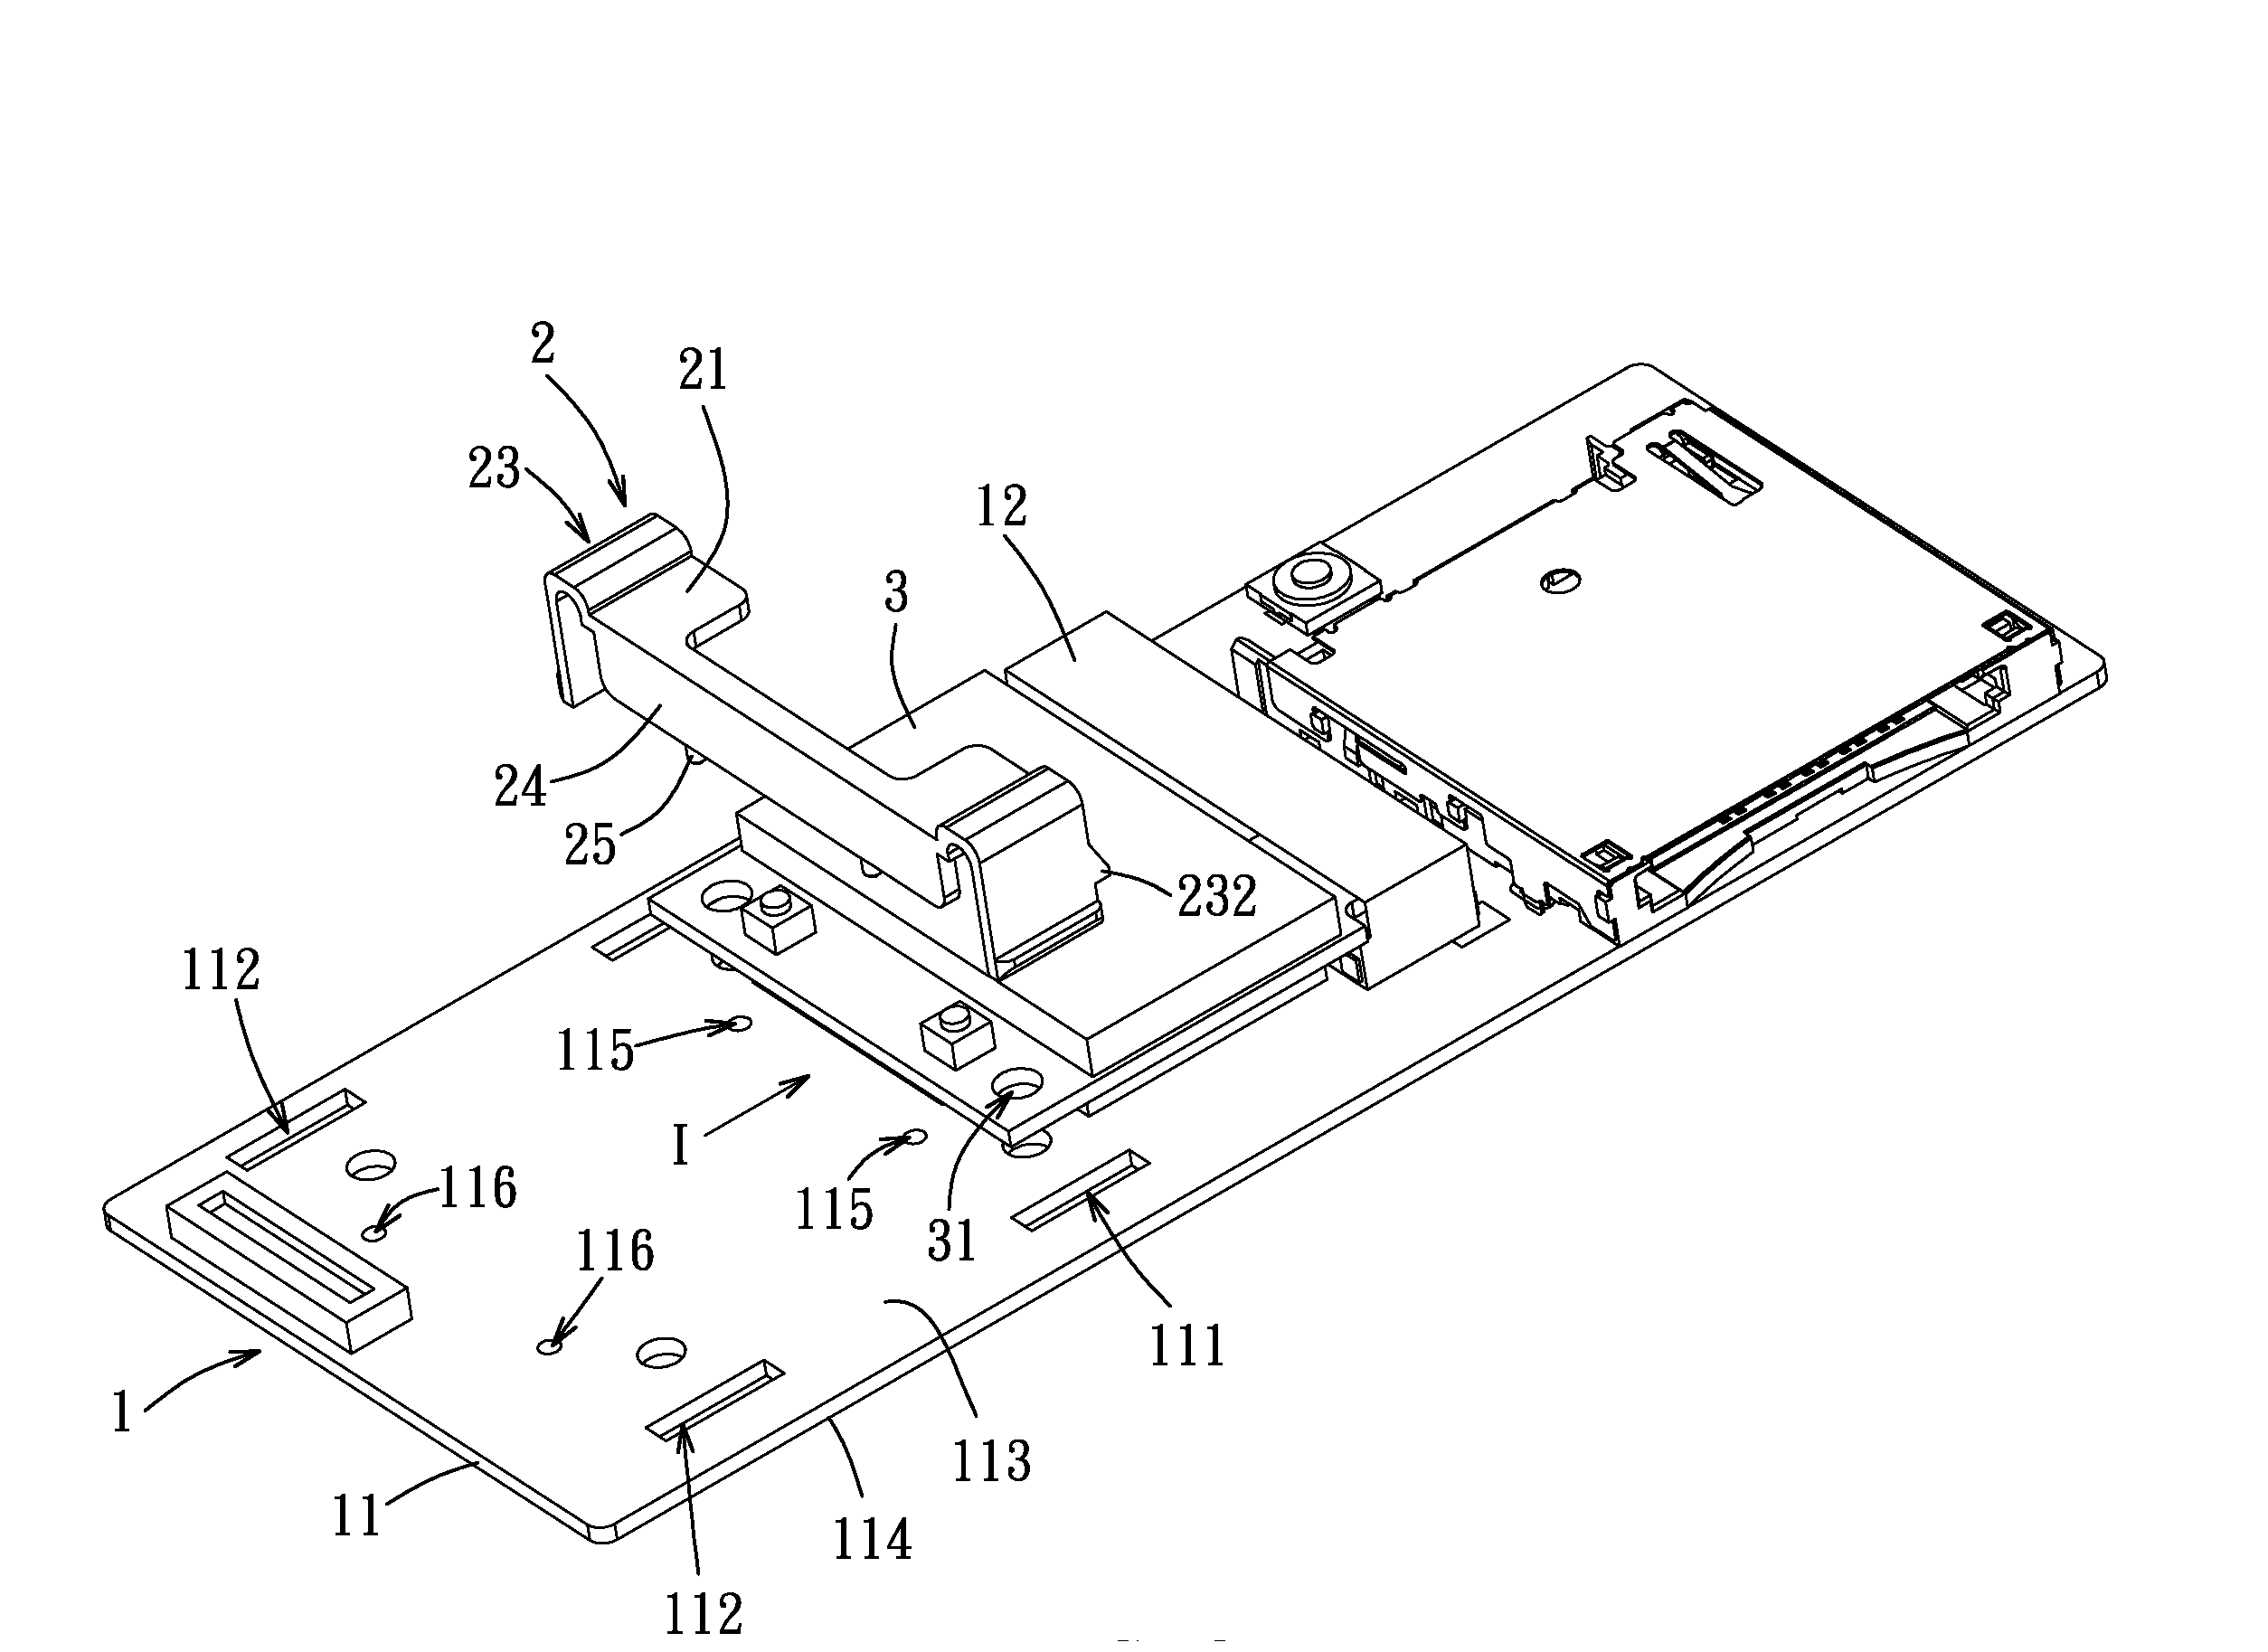 Circuit board device and a combined circuit board and electronic card assembly